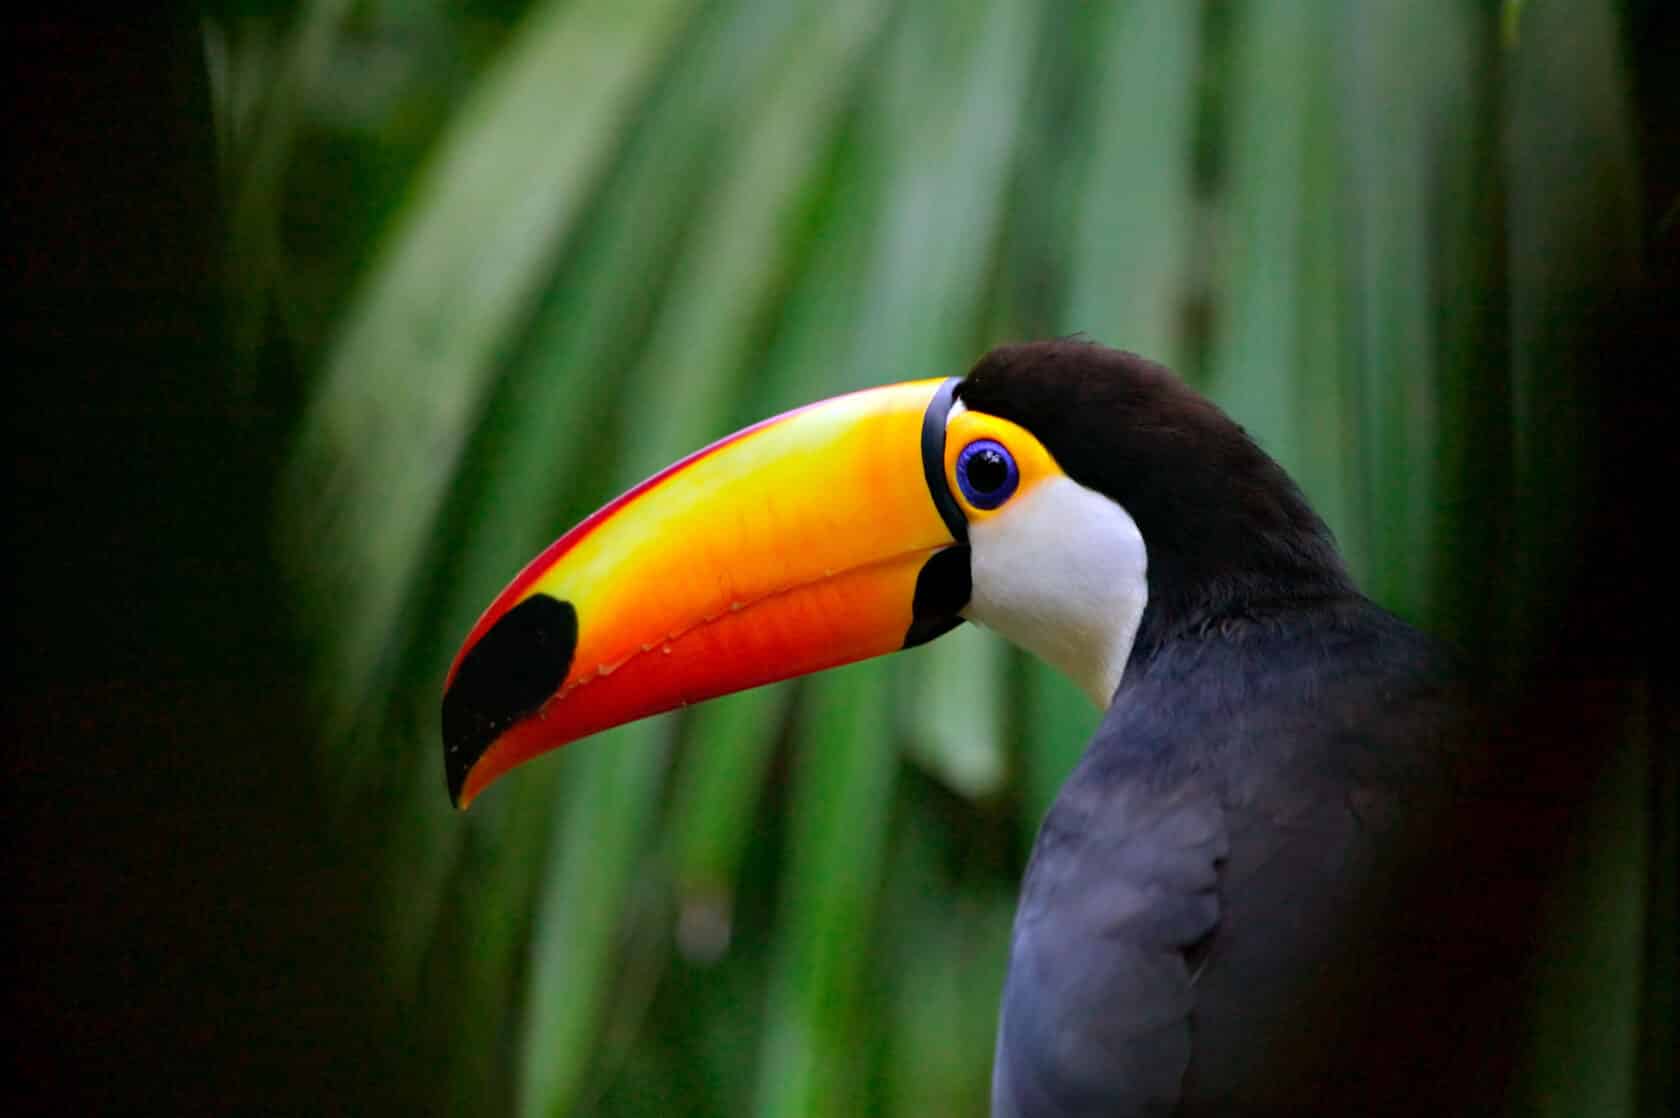 A toucan in the wild in Costa Rica.